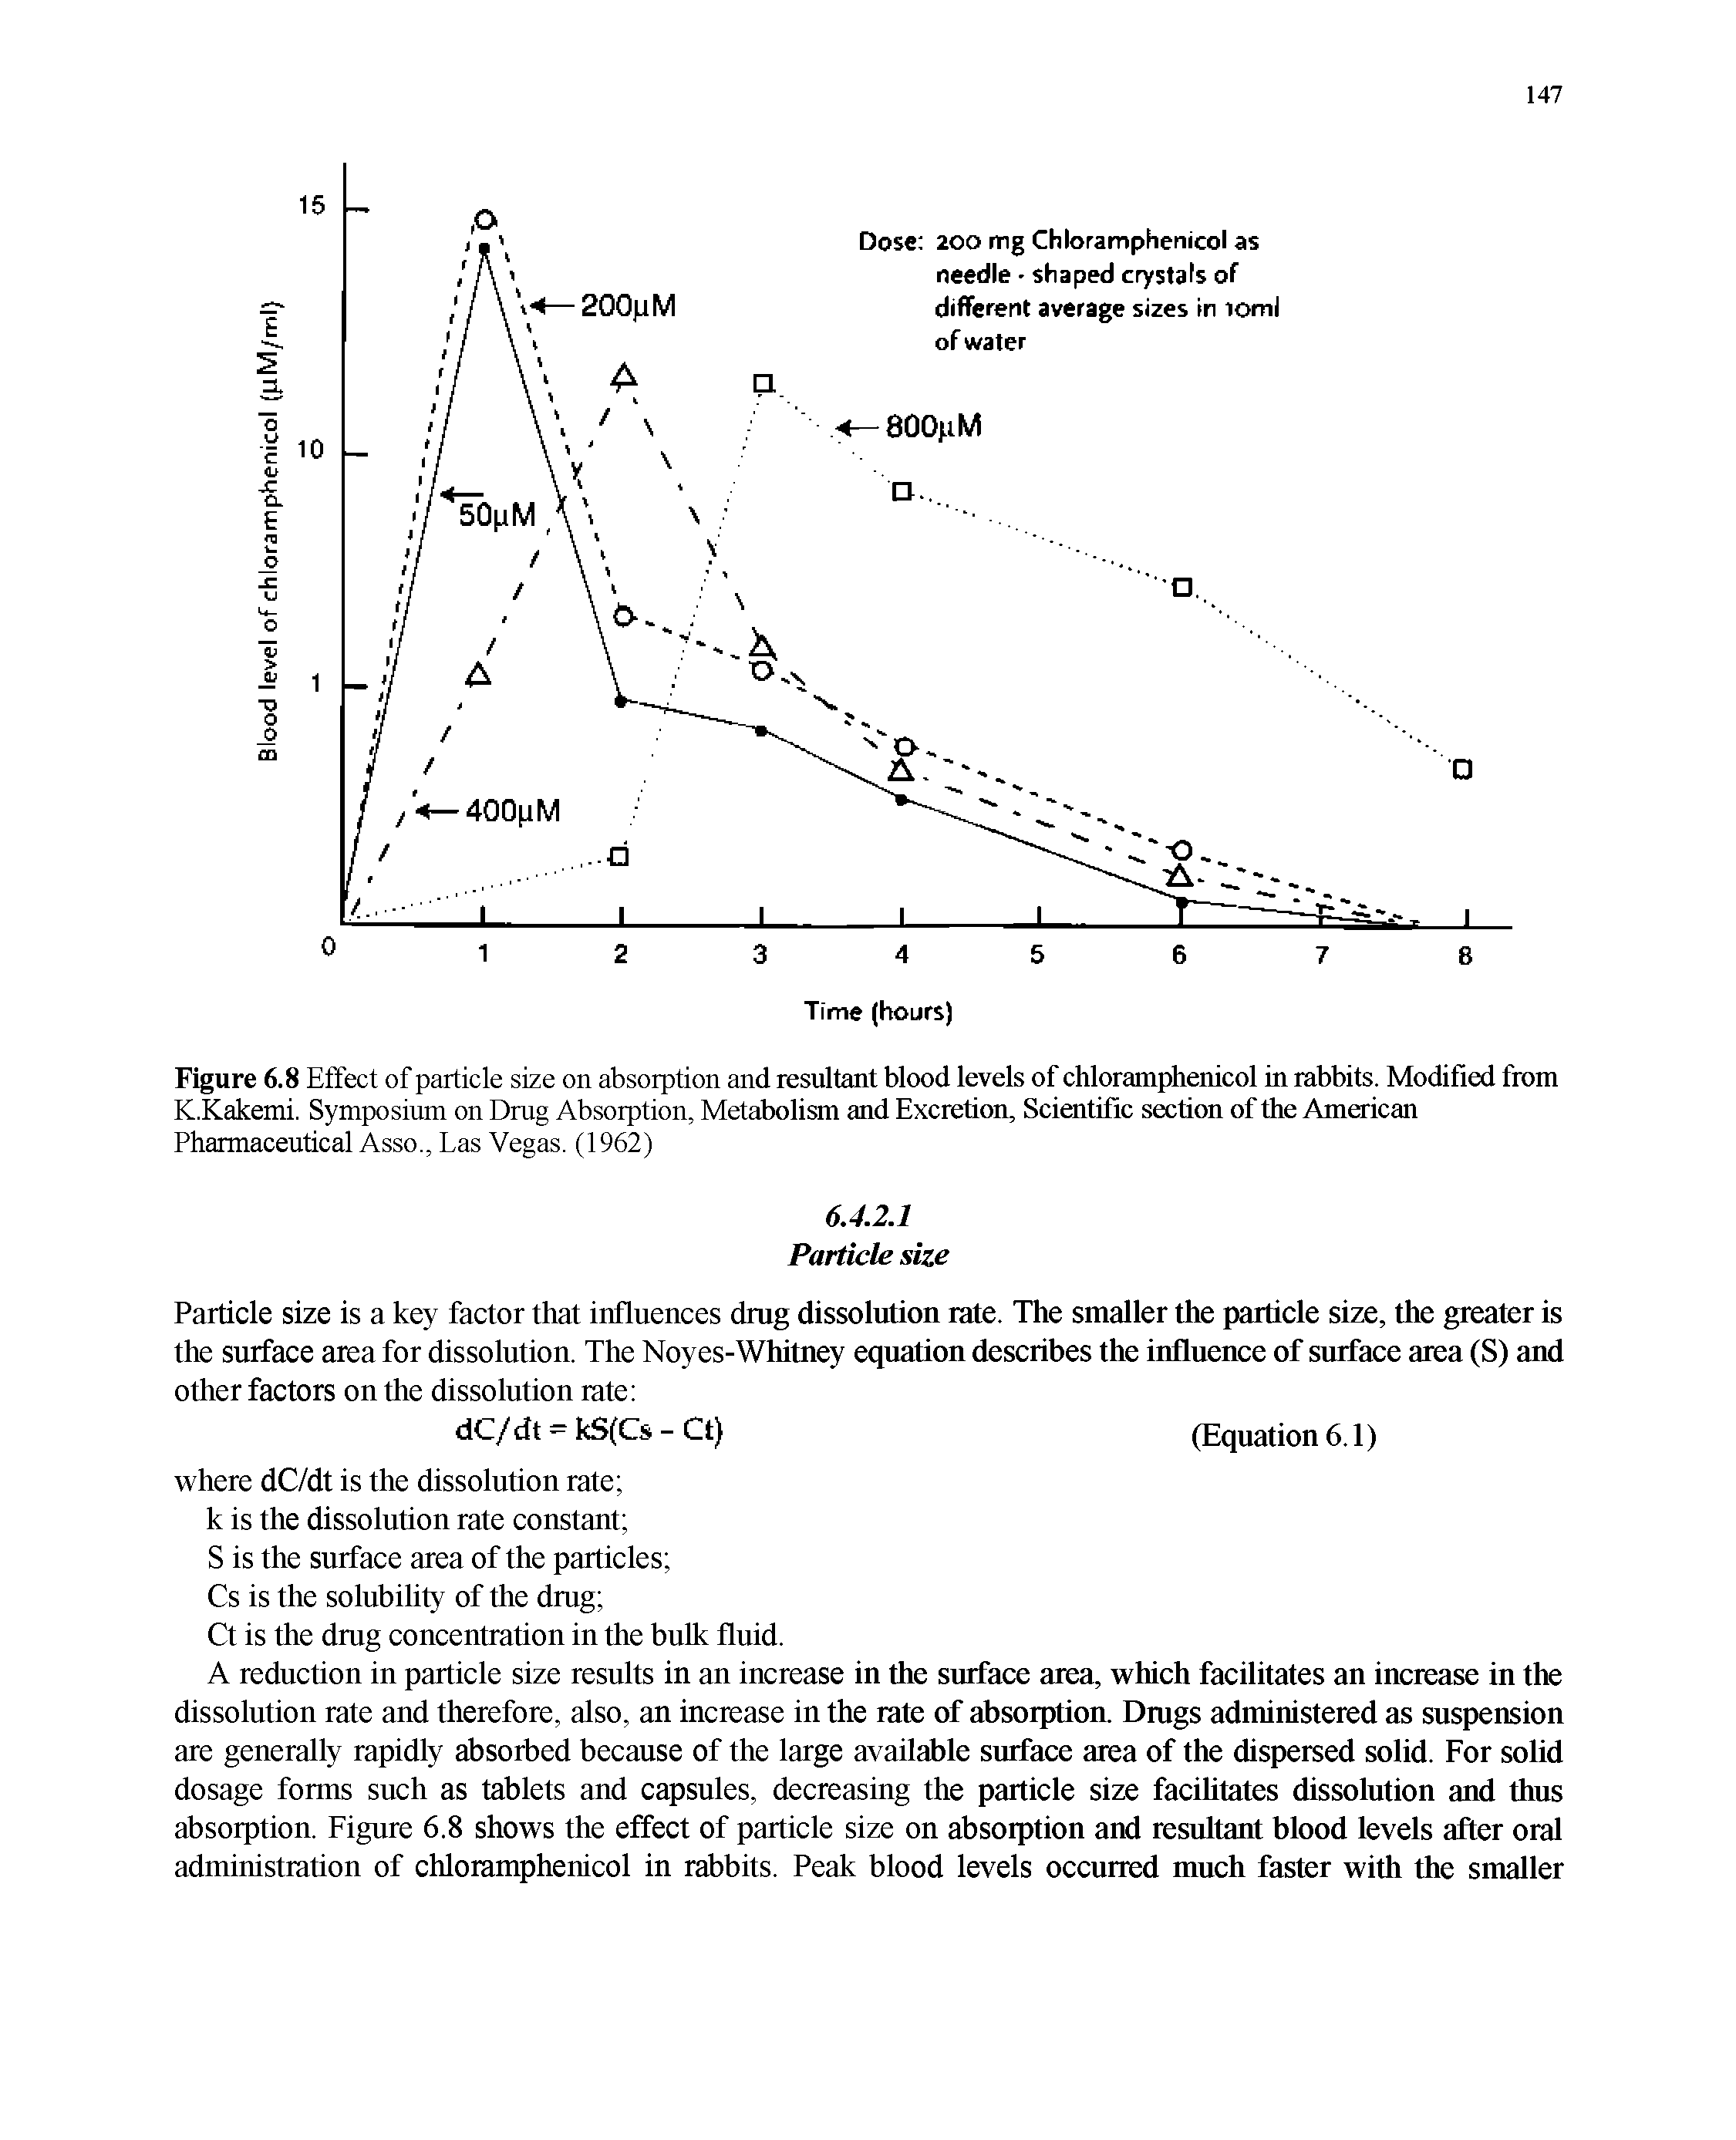 Figure 6.8 Effect of particle size on absorption and resultant blood levels of chloramphenicol in rabbits. Modified from K.Kakemi. Symposium on Drug Absorption, Metabolism and Excretion, Scientific section of the American Pharmaceutical Asso., Las Vegas. (1962)...